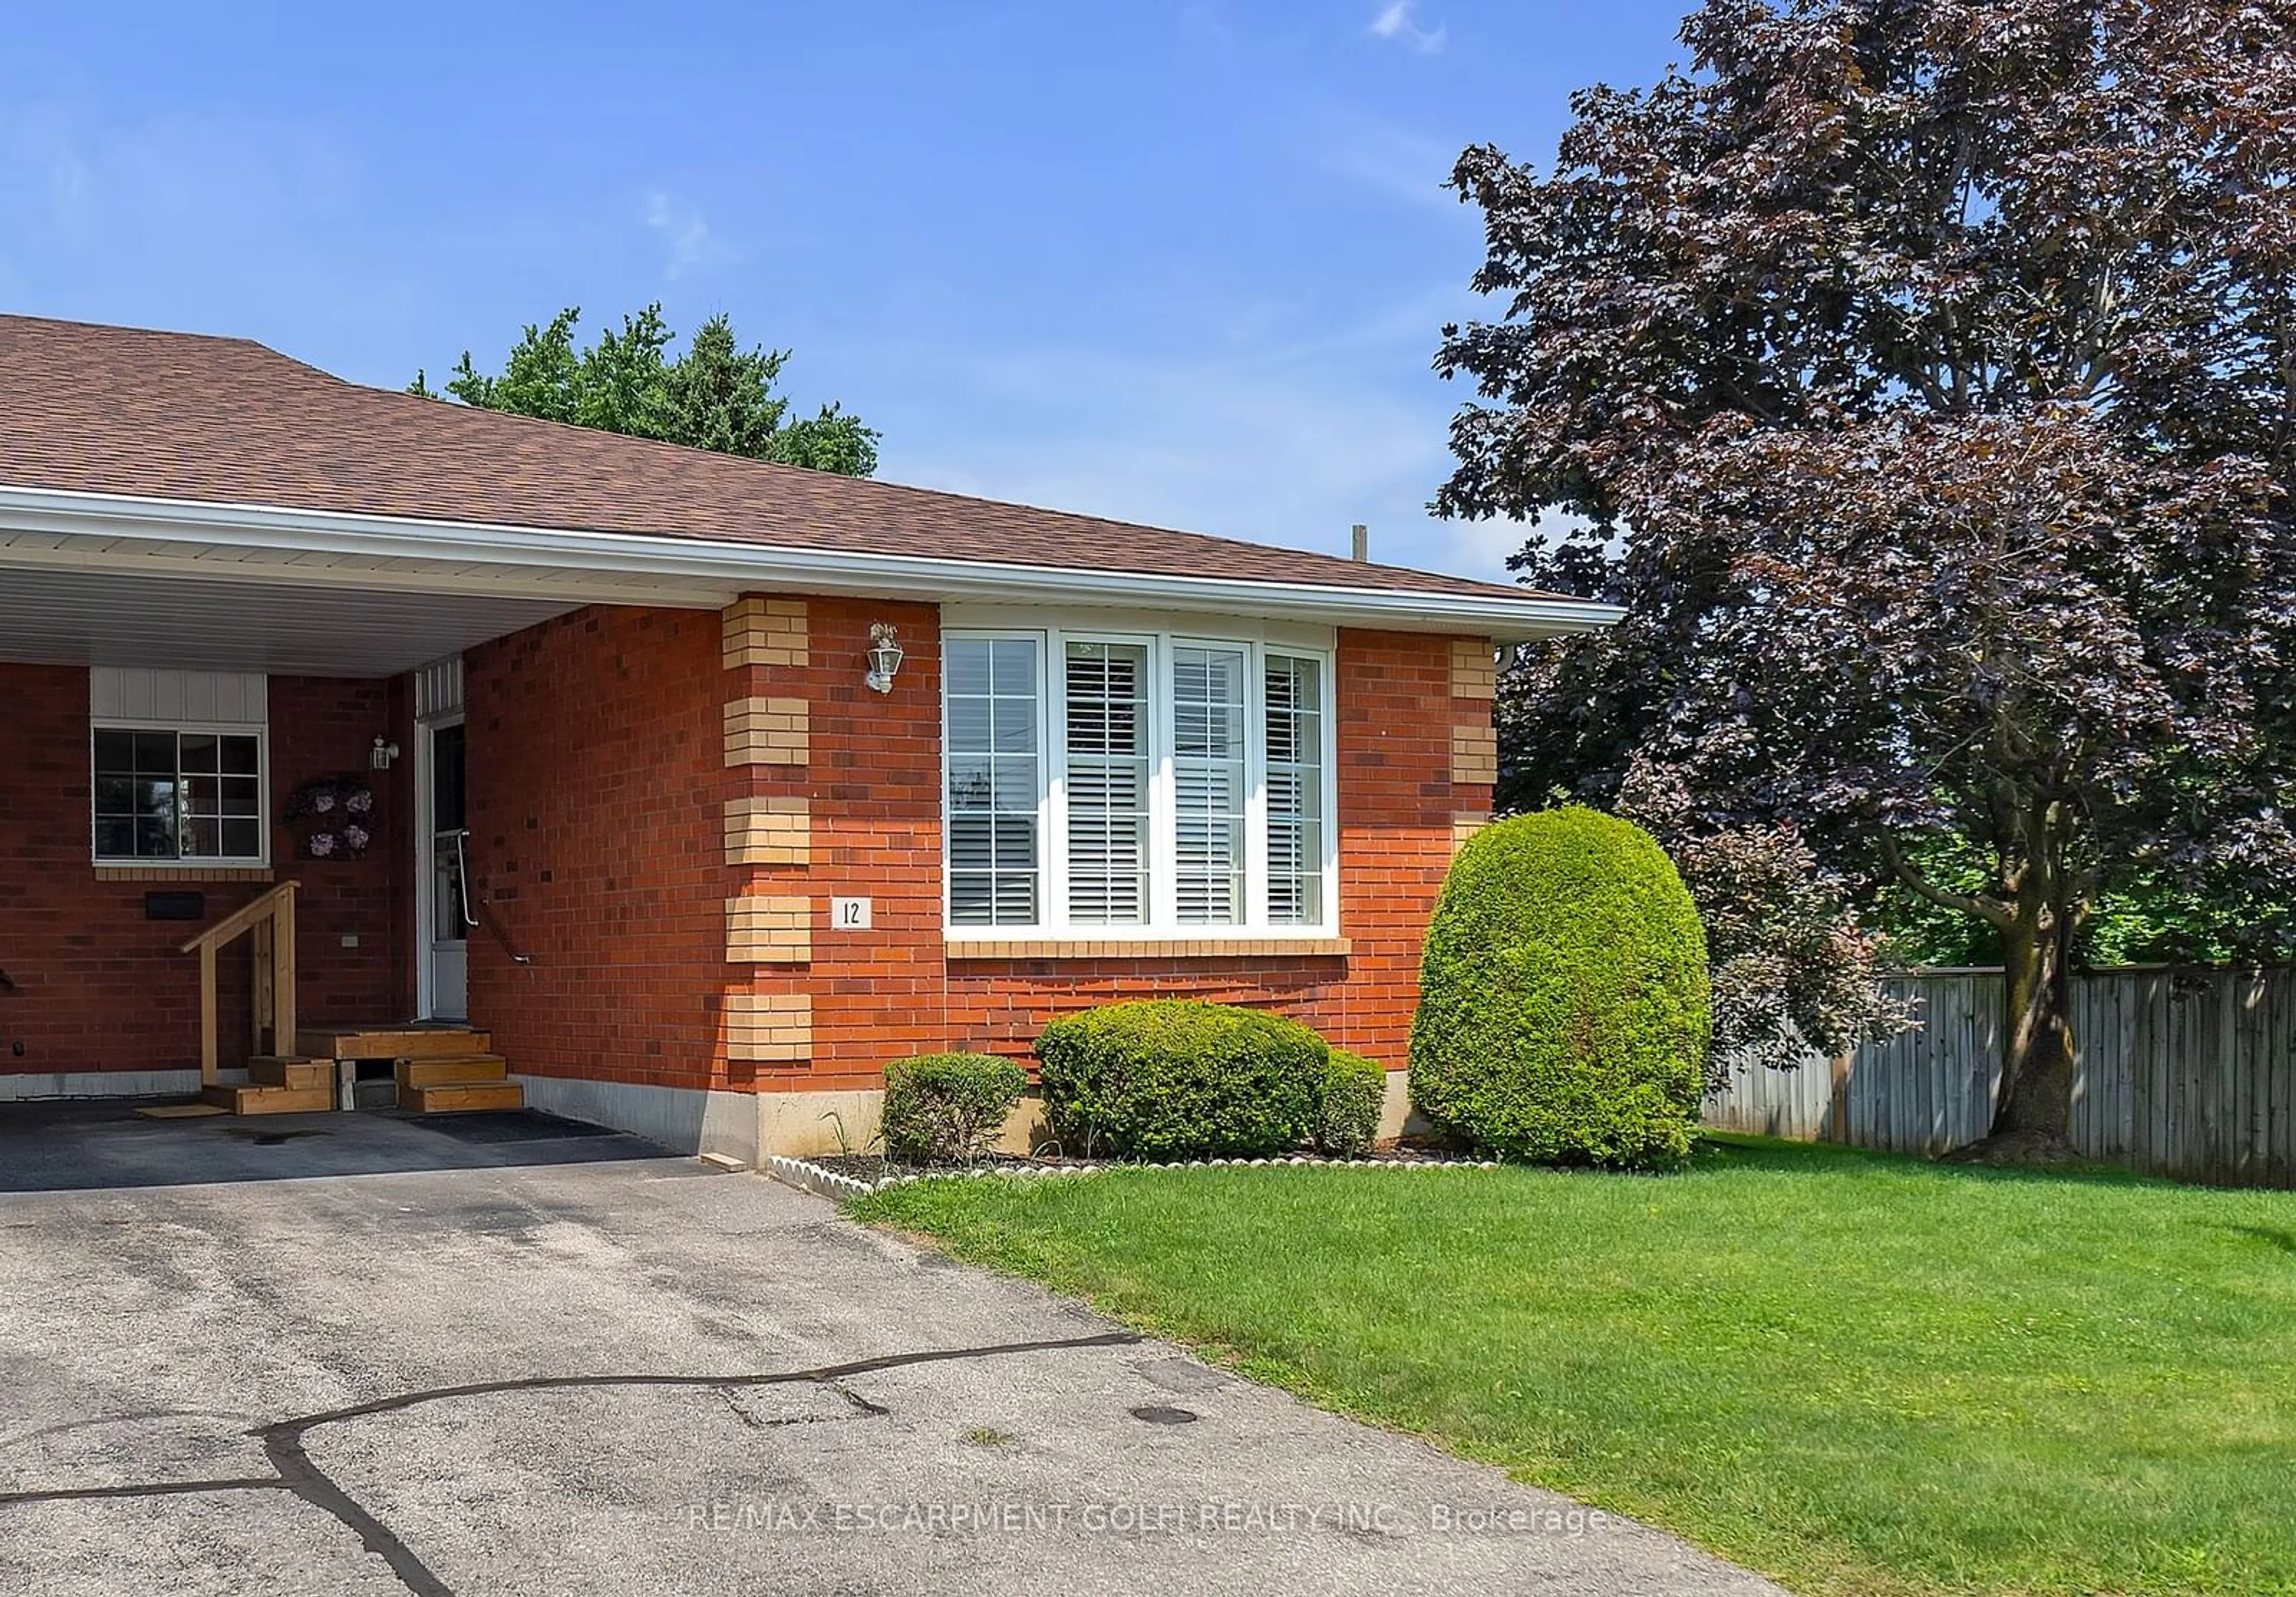 Home with brick exterior material for 20 Courtland Dr #12, Brantford Ontario N3R 7Y2